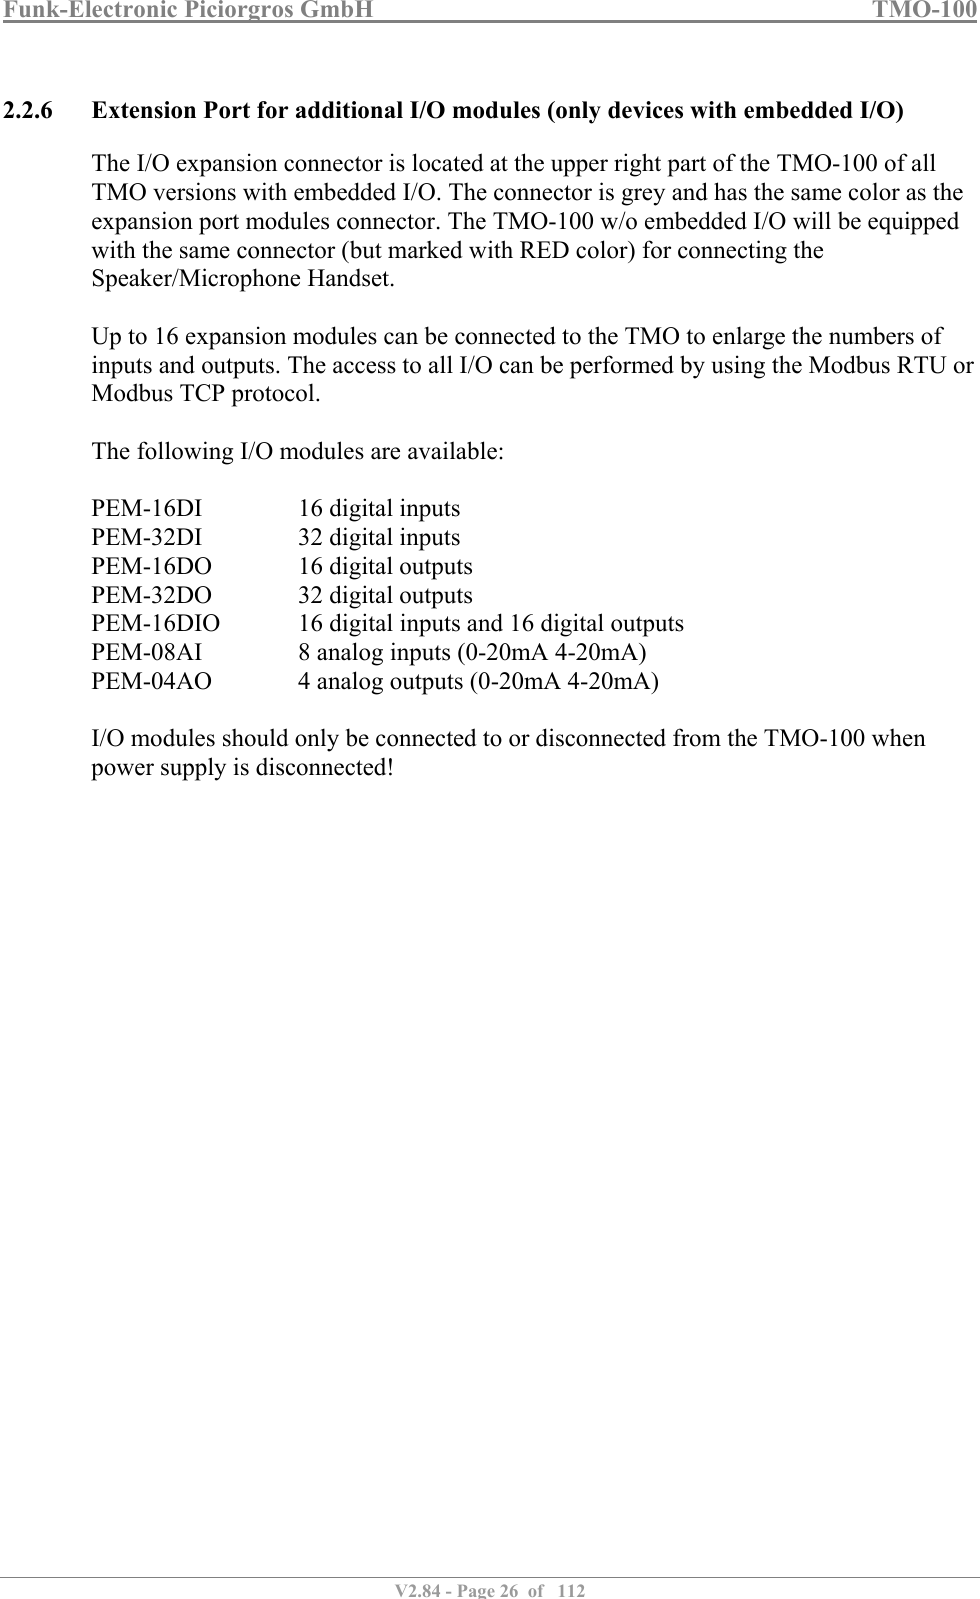 Funk-Electronic Piciorgros GmbH   TMO-100   V2.84 - Page 26  of   112   2.2.6 Extension Port for additional I/O modules (only devices with embedded I/O) The I/O expansion connector is located at the upper right part of the TMO-100 of all TMO versions with embedded I/O. The connector is grey and has the same color as the expansion port modules connector. The TMO-100 w/o embedded I/O will be equipped with the same connector (but marked with RED color) for connecting the Speaker/Microphone Handset.  Up to 16 expansion modules can be connected to the TMO to enlarge the numbers of inputs and outputs. The access to all I/O can be performed by using the Modbus RTU or Modbus TCP protocol.  The following I/O modules are available:  PEM-16DI    16 digital inputs PEM-32DI    32 digital inputs PEM-16DO    16 digital outputs PEM-32DO    32 digital outputs PEM-16DIO   16 digital inputs and 16 digital outputs PEM-08AI    8 analog inputs (0-20mA 4-20mA) PEM-04AO    4 analog outputs (0-20mA 4-20mA)  I/O modules should only be connected to or disconnected from the TMO-100 when power supply is disconnected!  